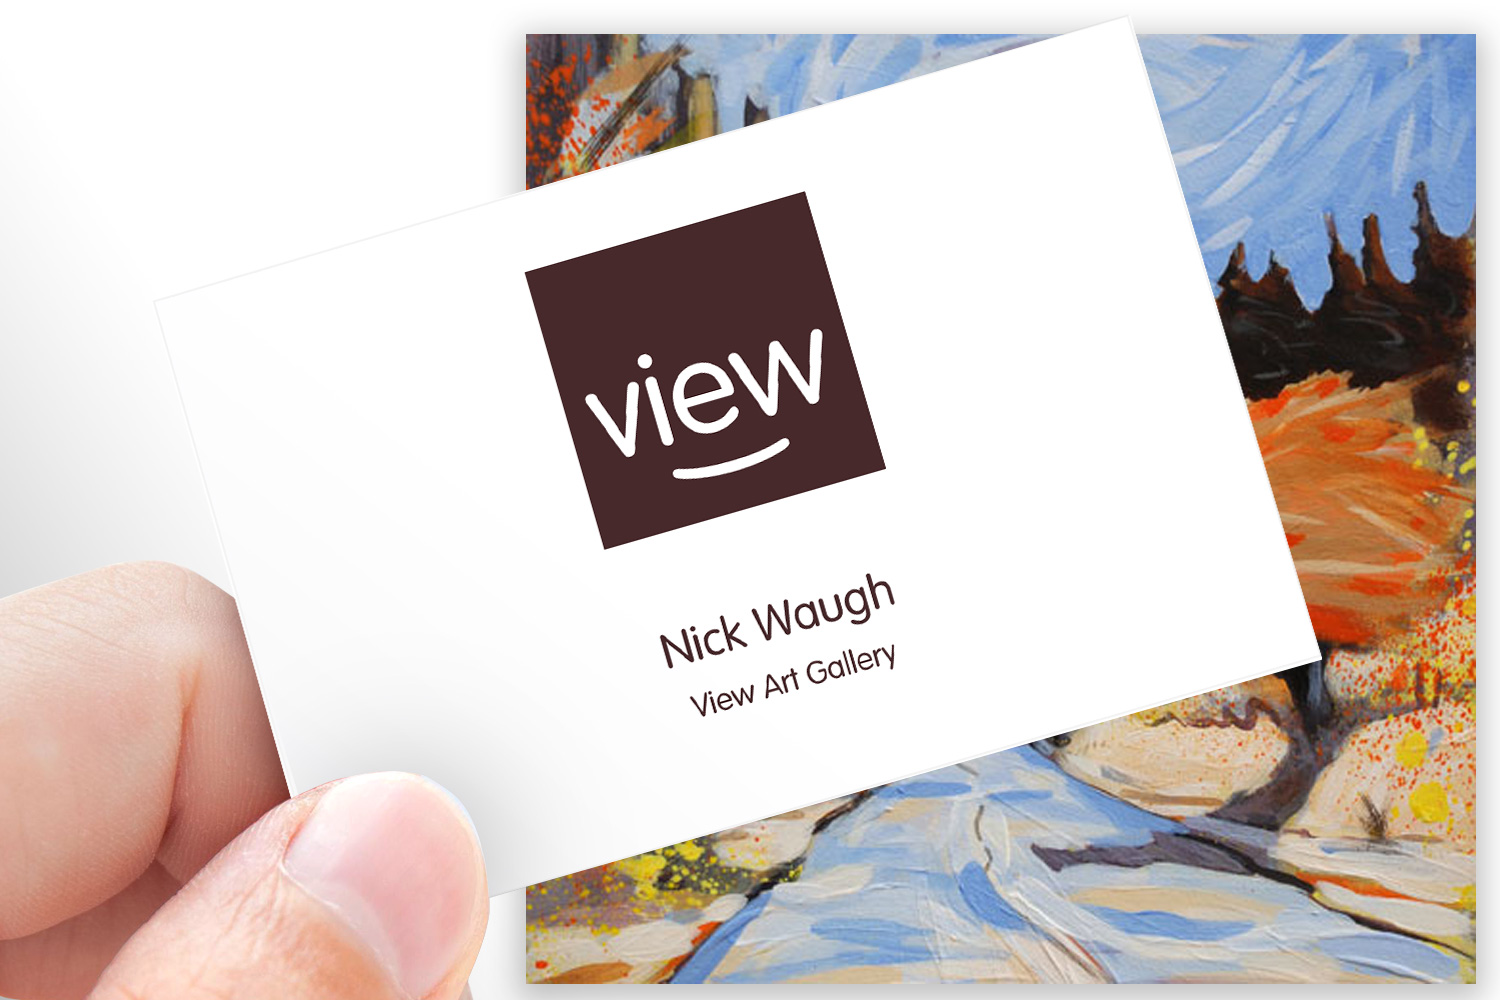 View Art Gallery business card